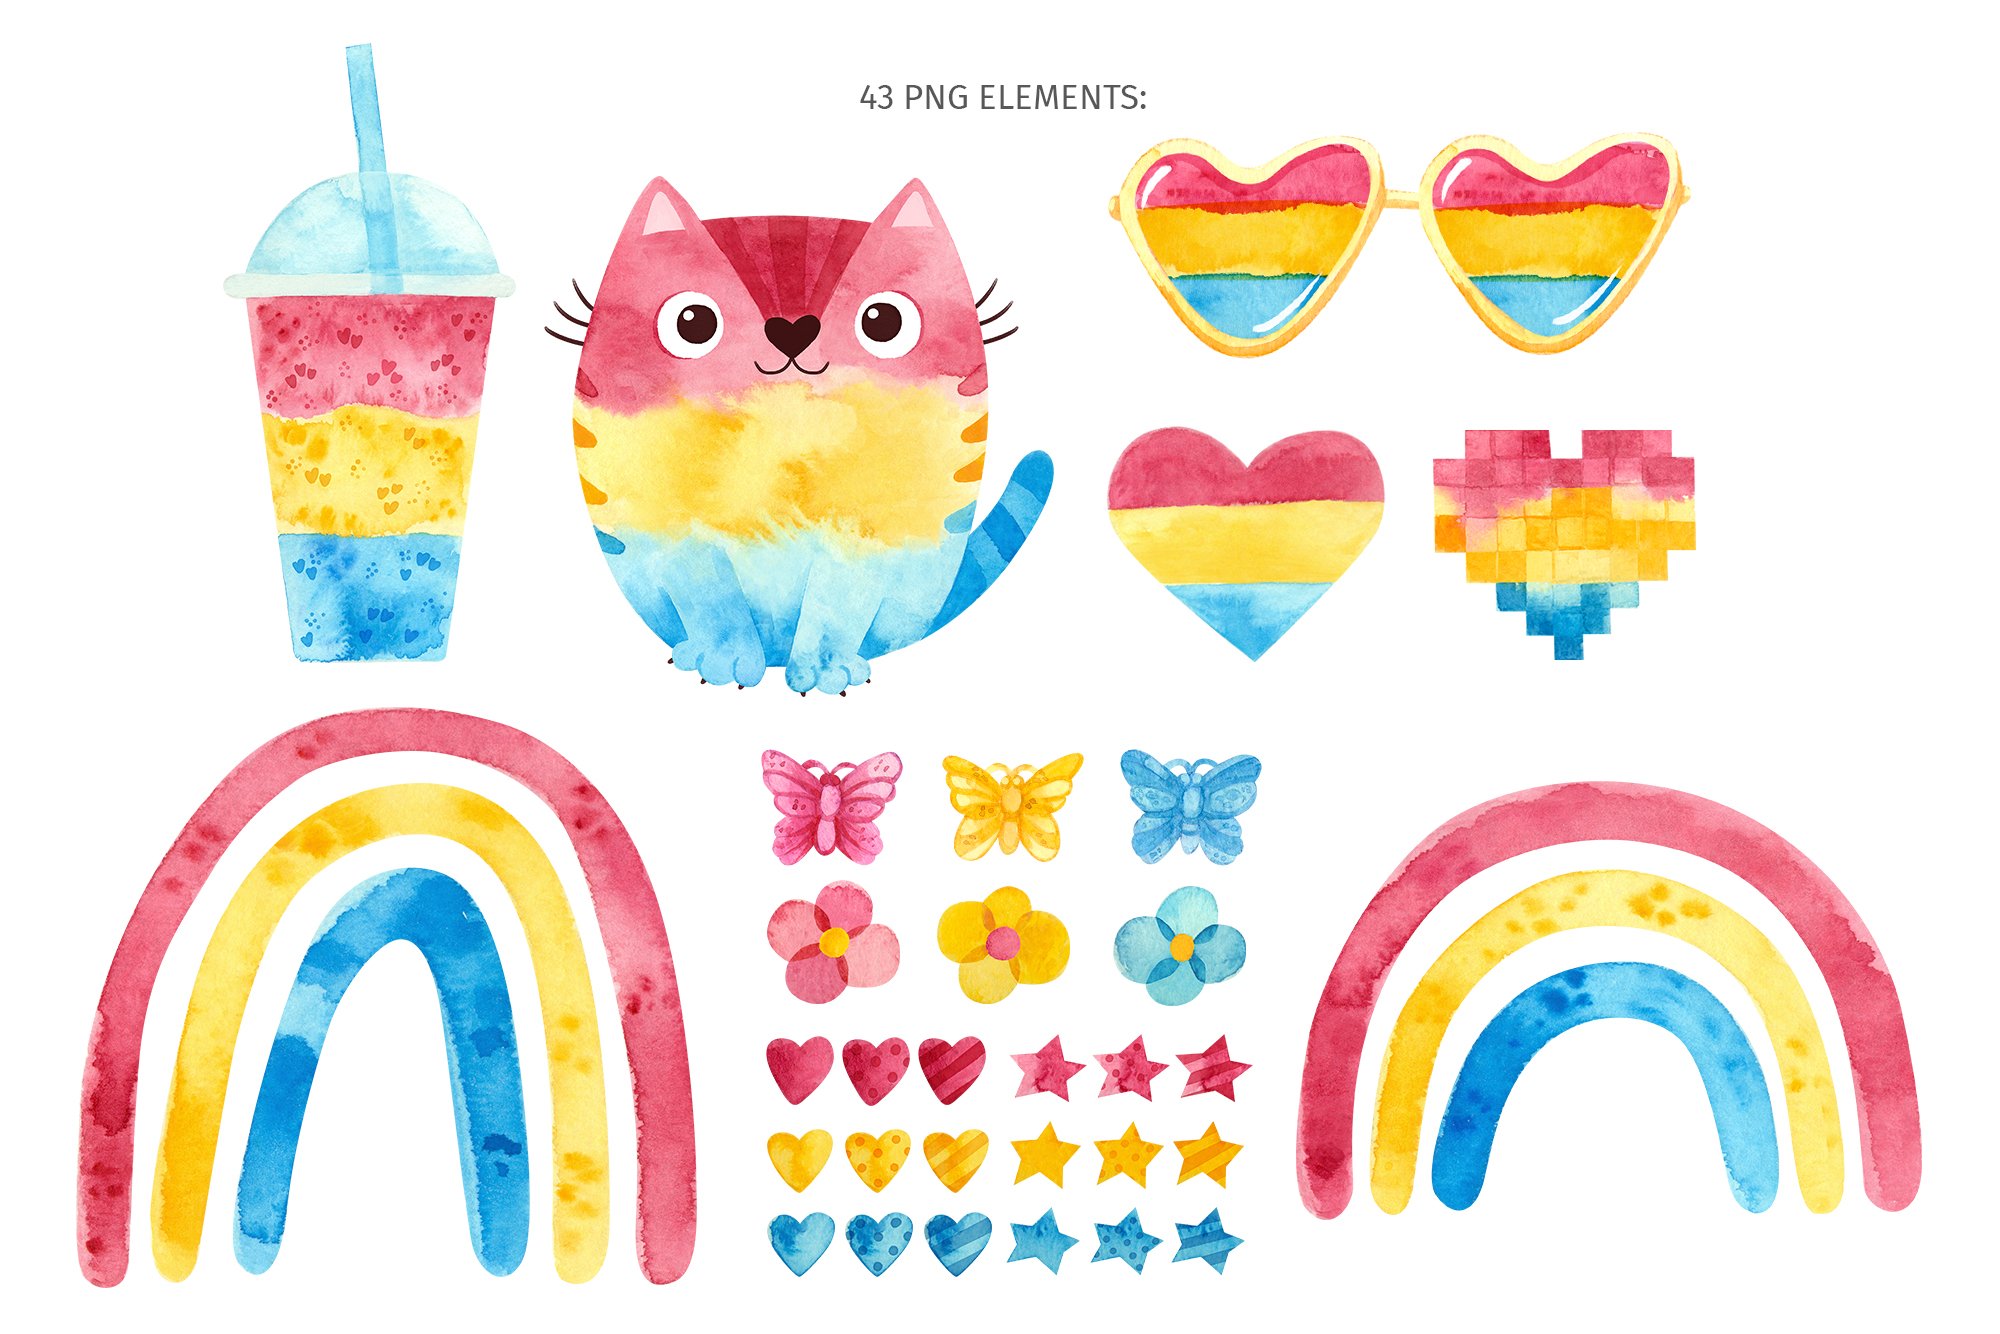 Pansexual pride clipart & patterns preview image.